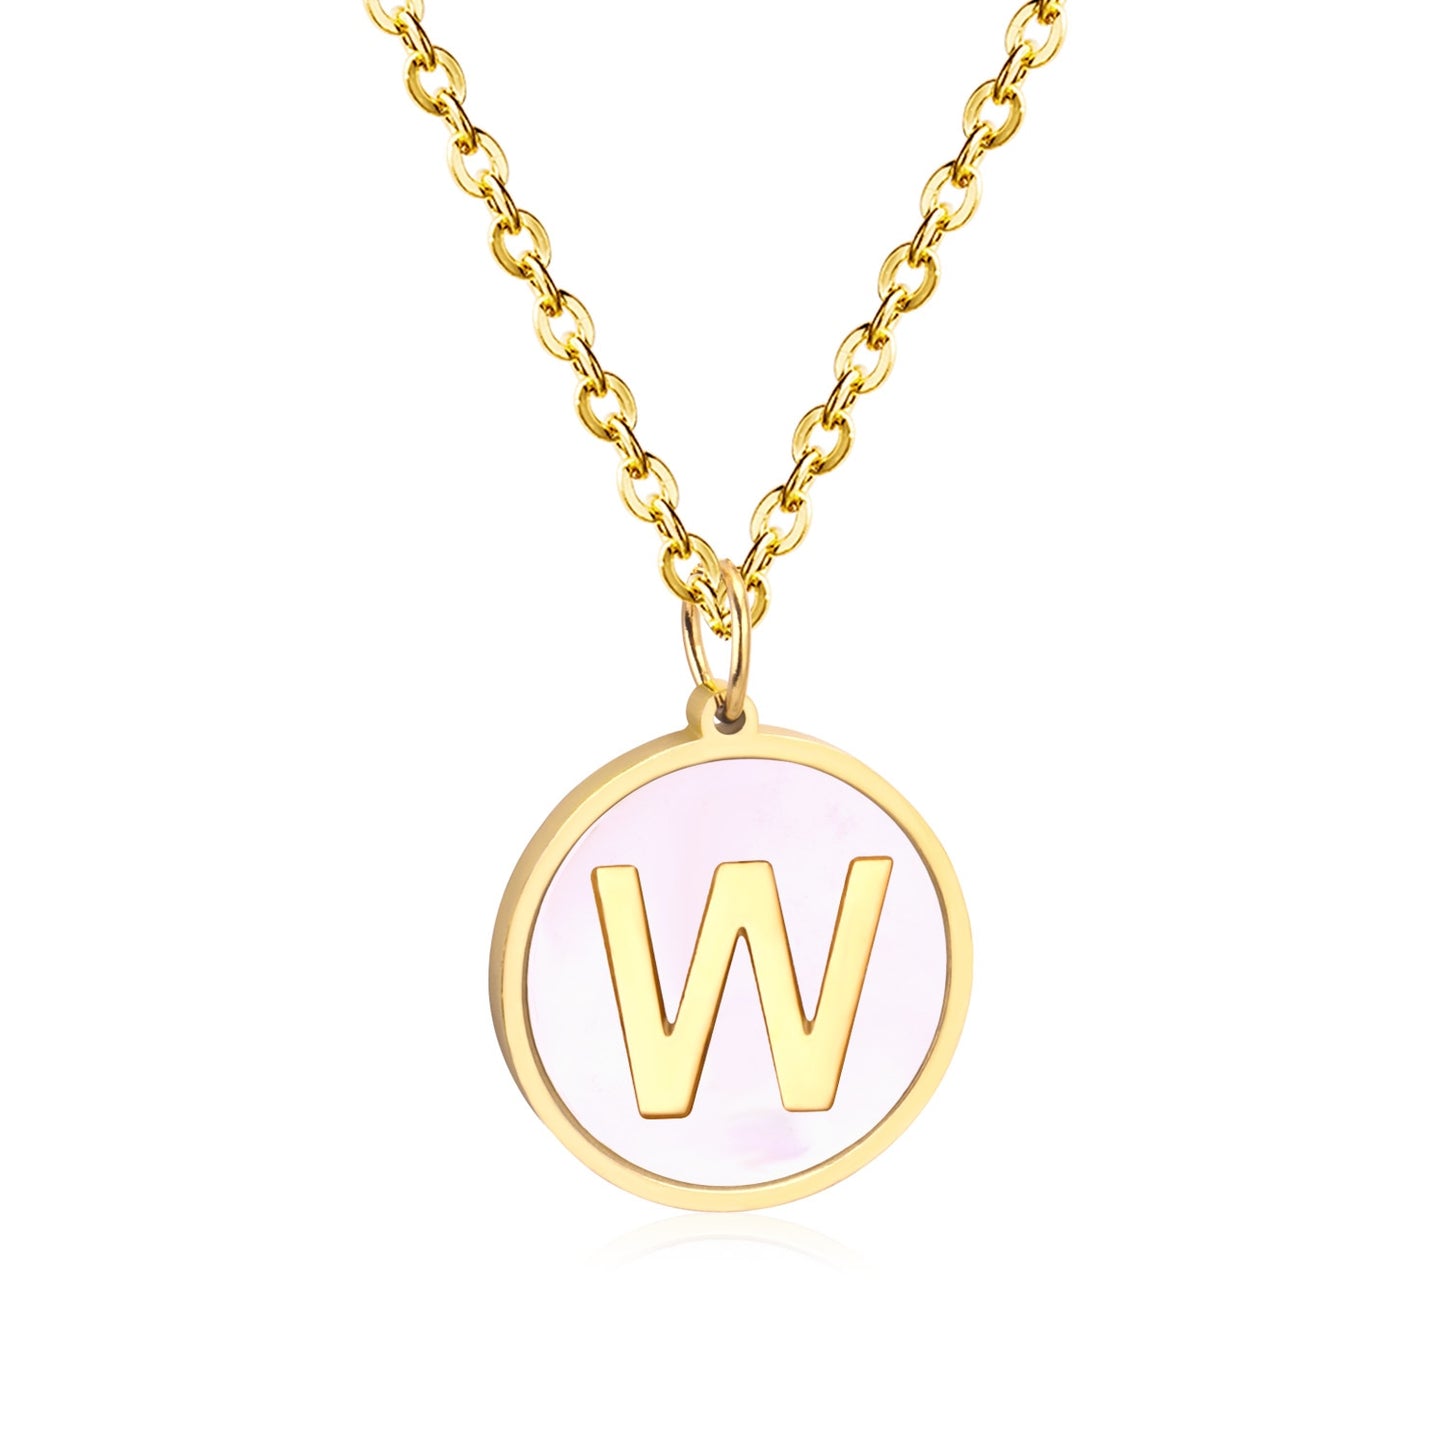 Initial Women's Necklace Gold/Silver / White Shell Pendant